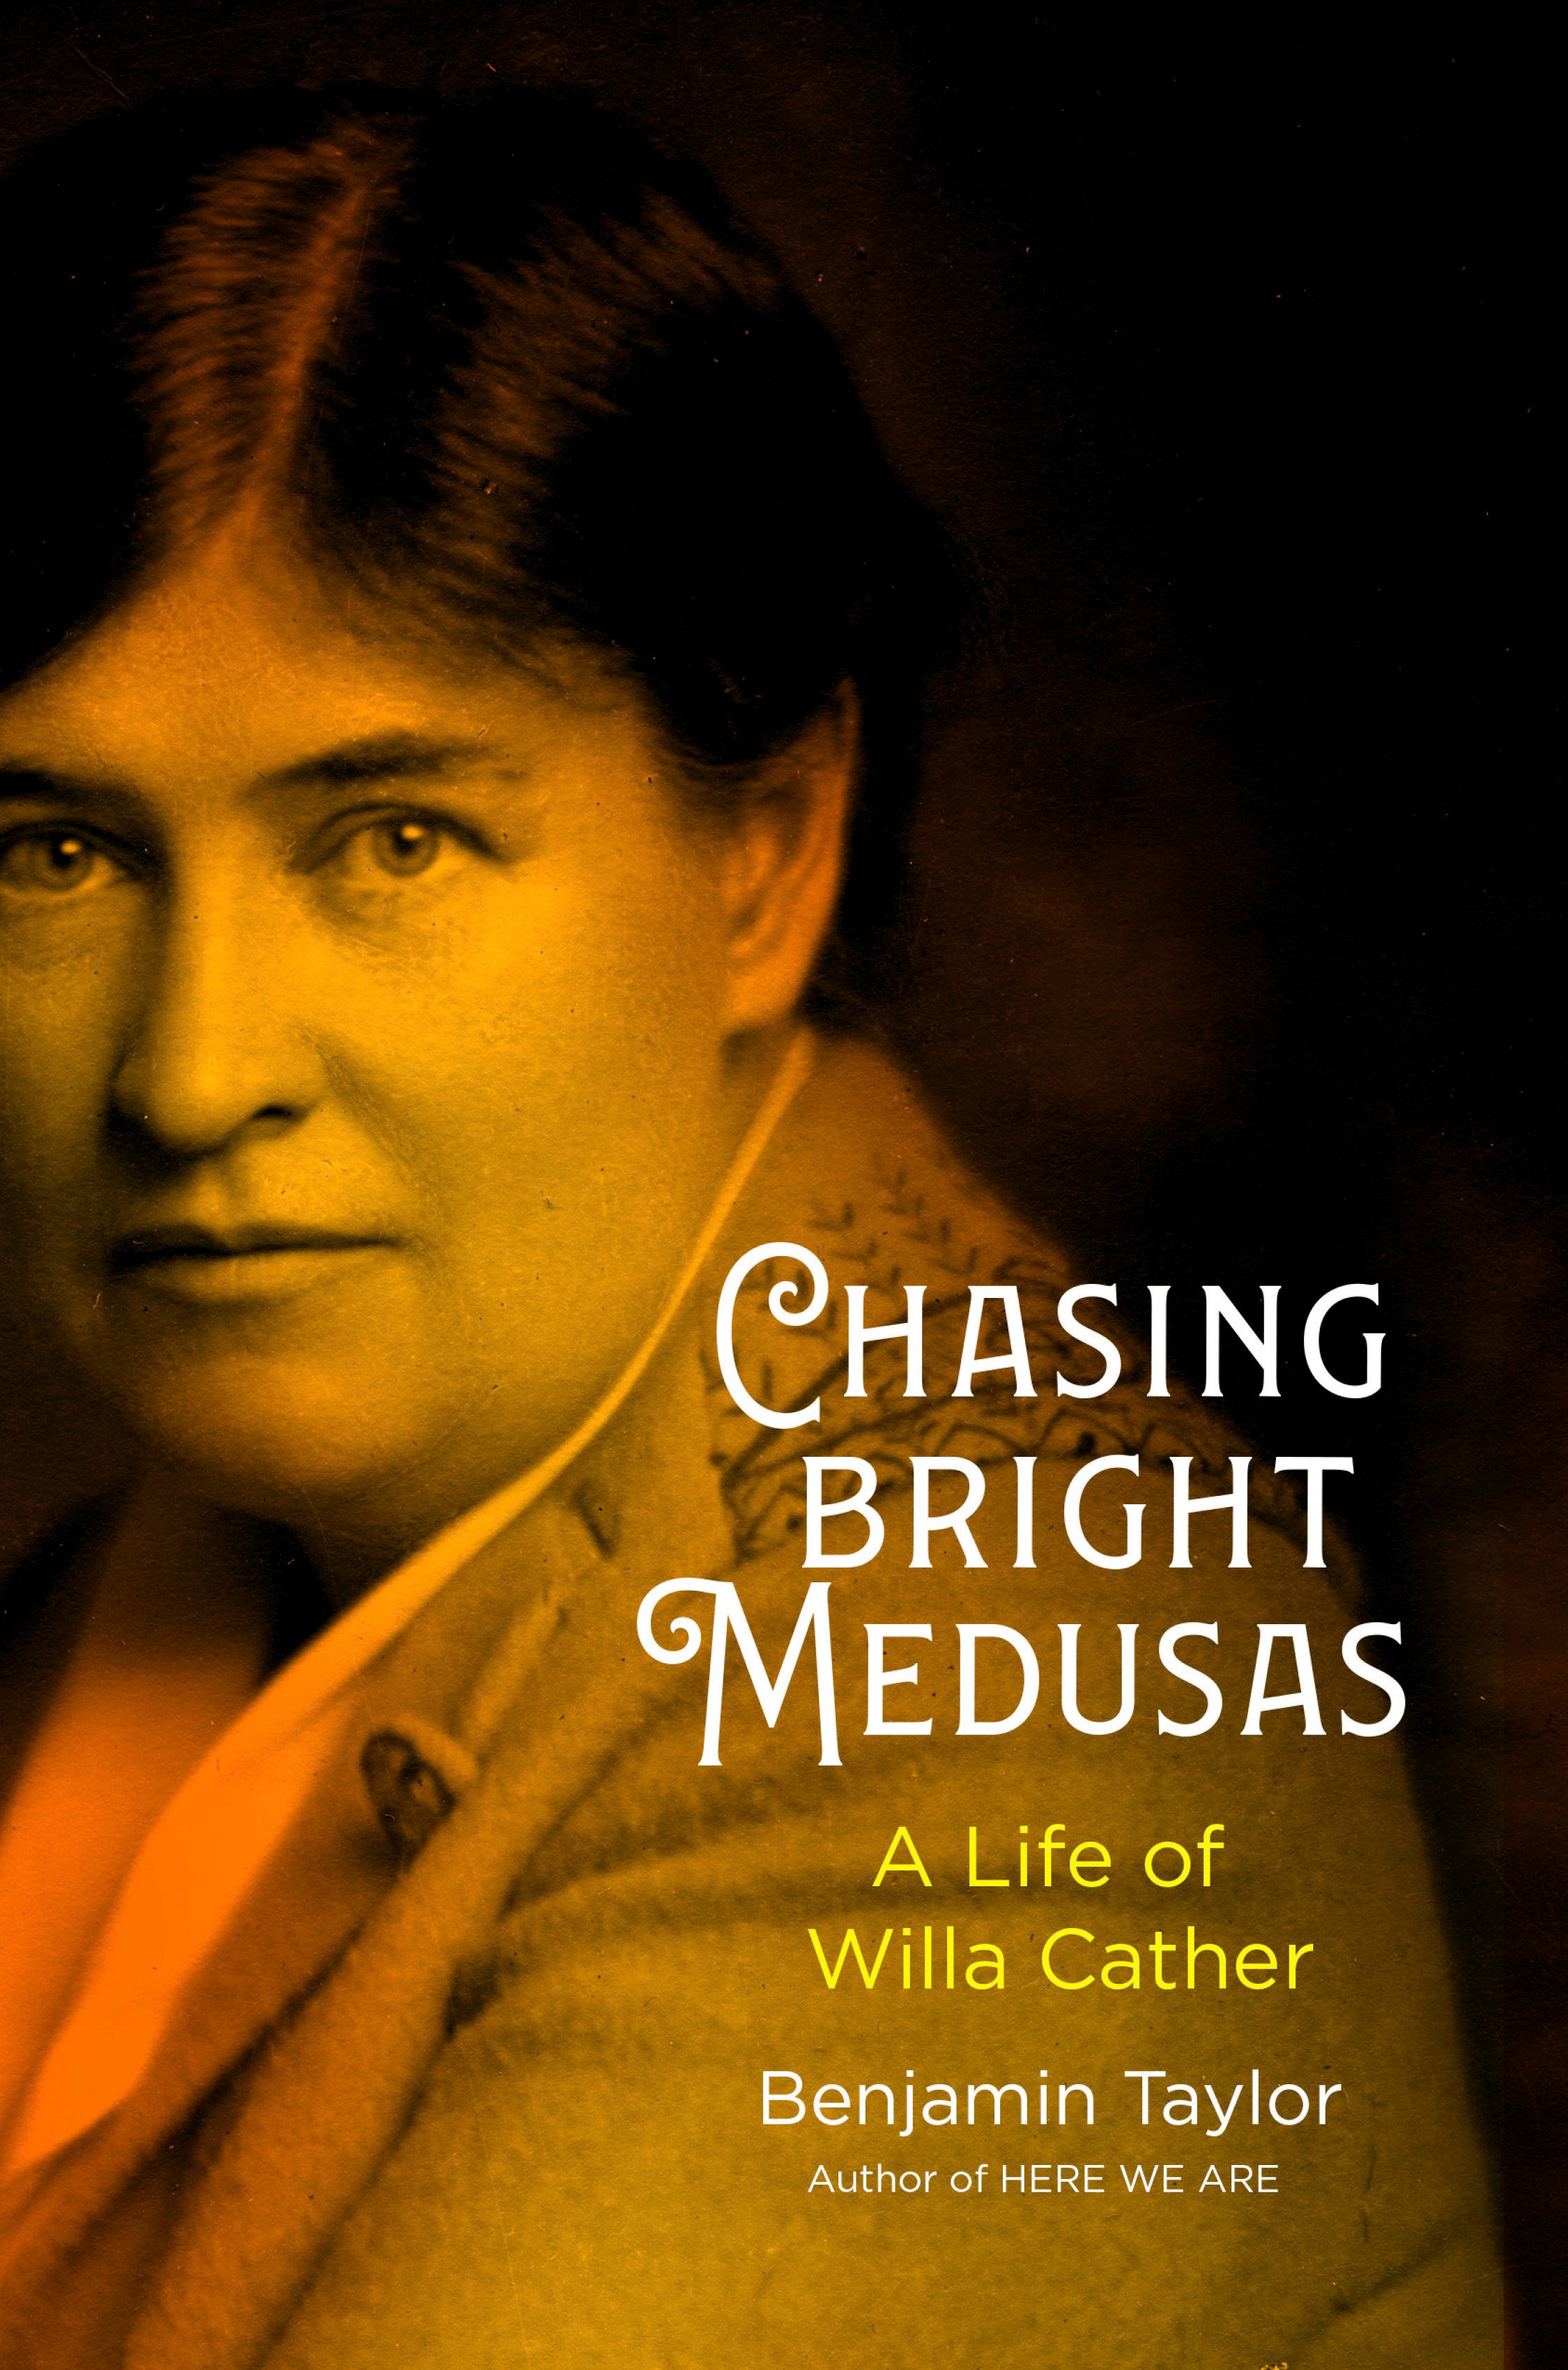 Book Review - Chasing Bright Medusas